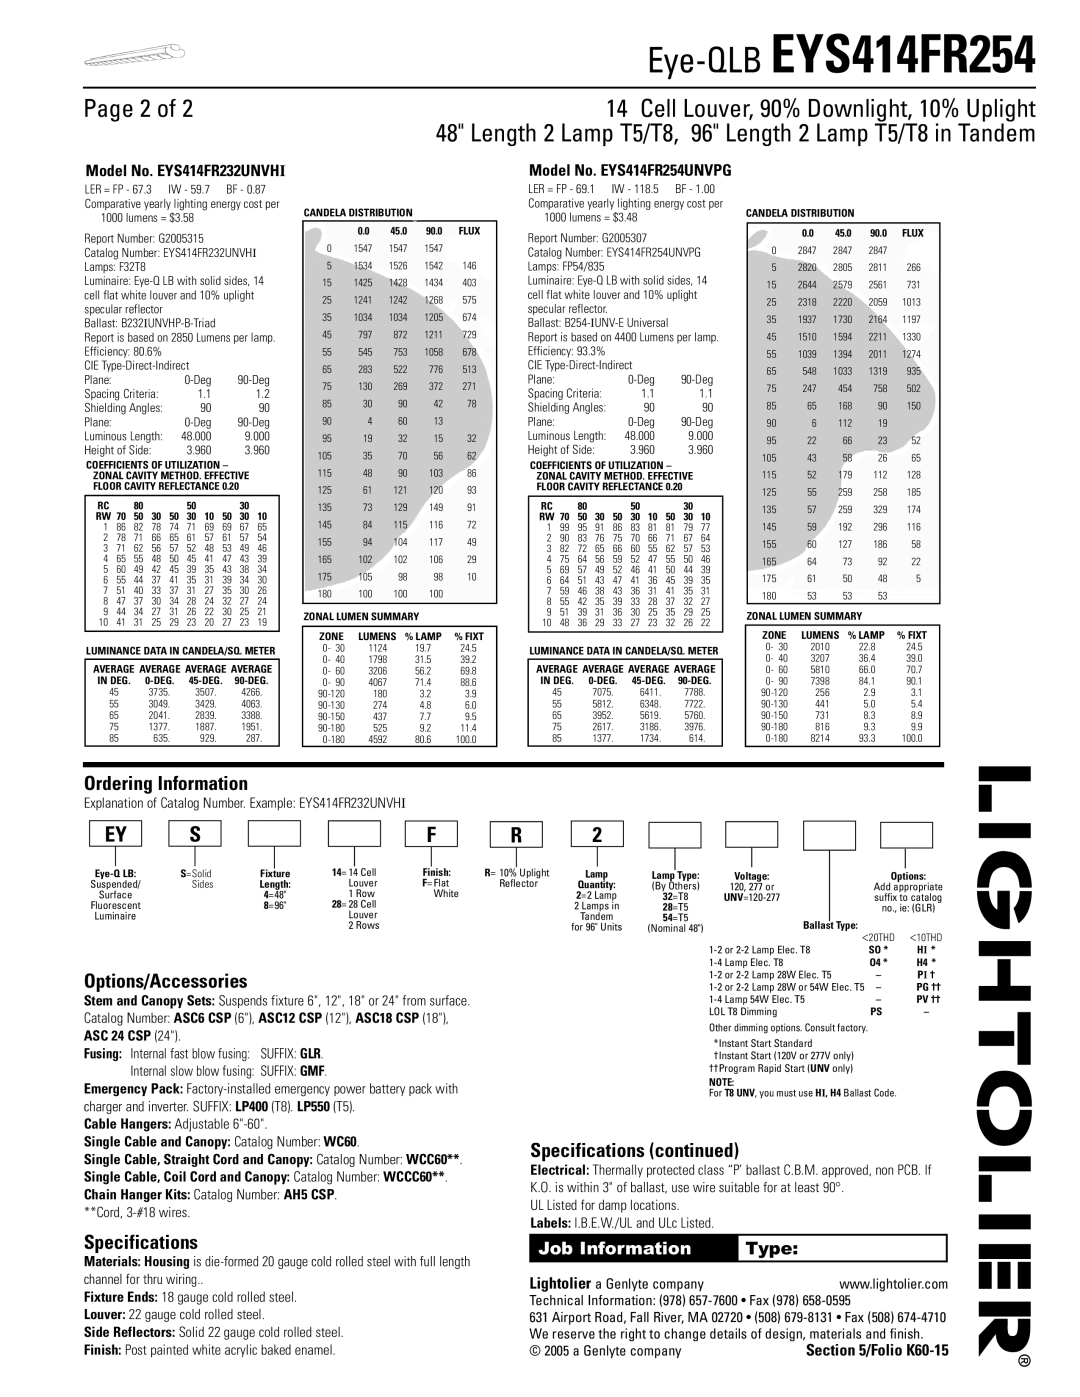 Lightolier EYS414FR254 Page 2 of, Ordering Information, Options/Accessories, Specifications continued, Job Information 